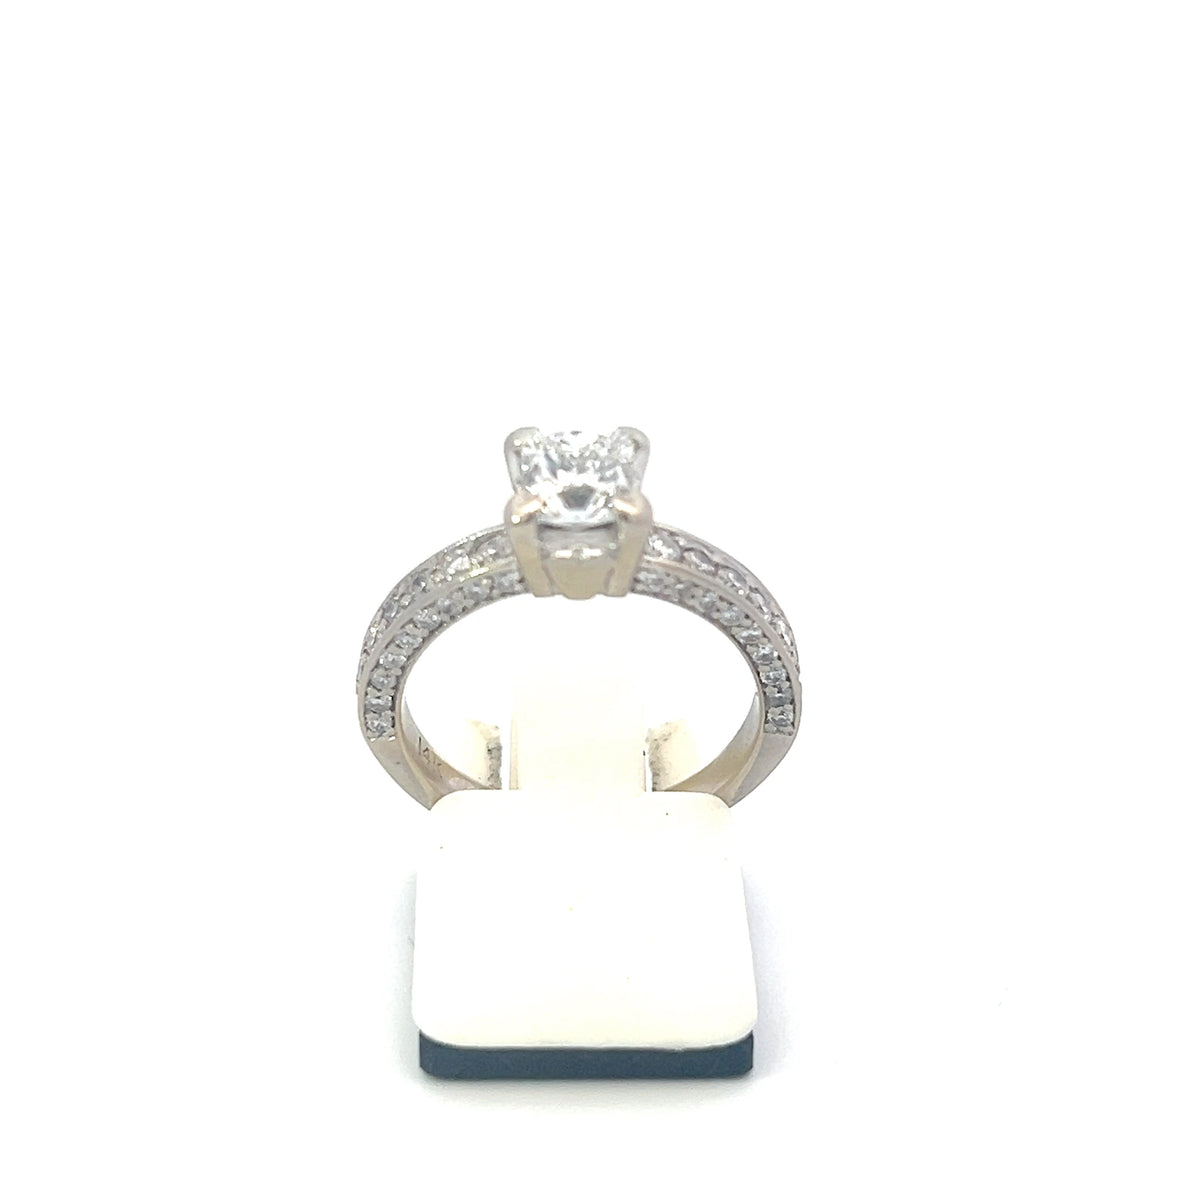 Previously Loved - 2.24cttw Princess Cut Diamond Engagement Ring Set